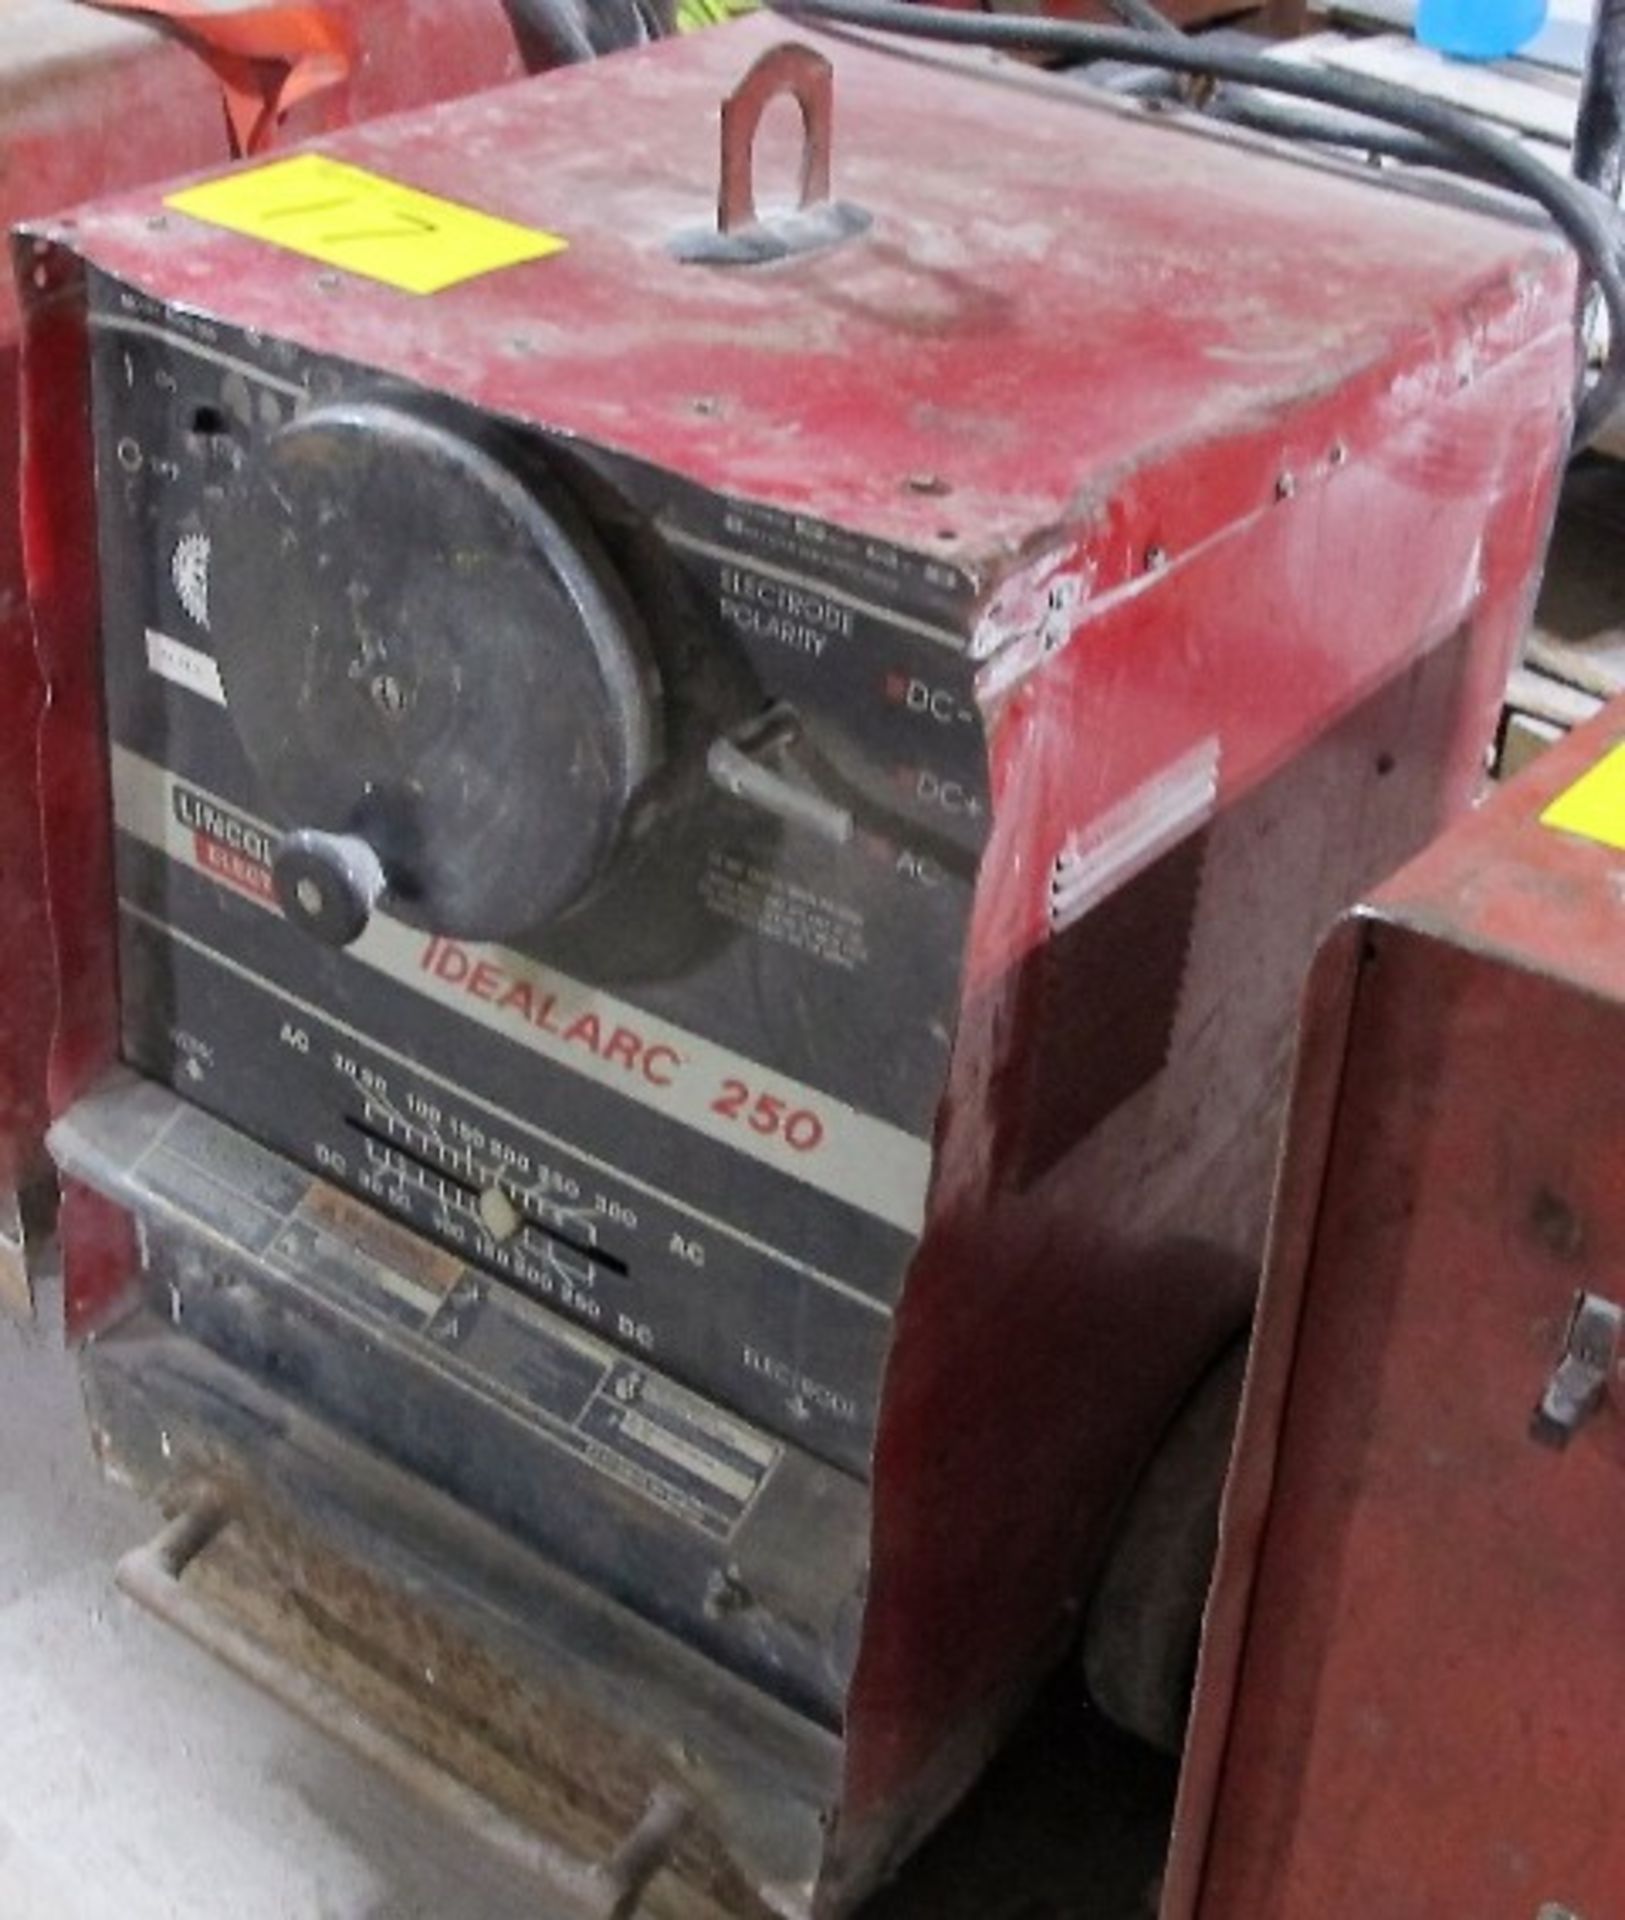 LINCOLN ELECTRIC IDEAL ARC 250 WELDER ON CART W/POWER CABLE, S/N 1951015